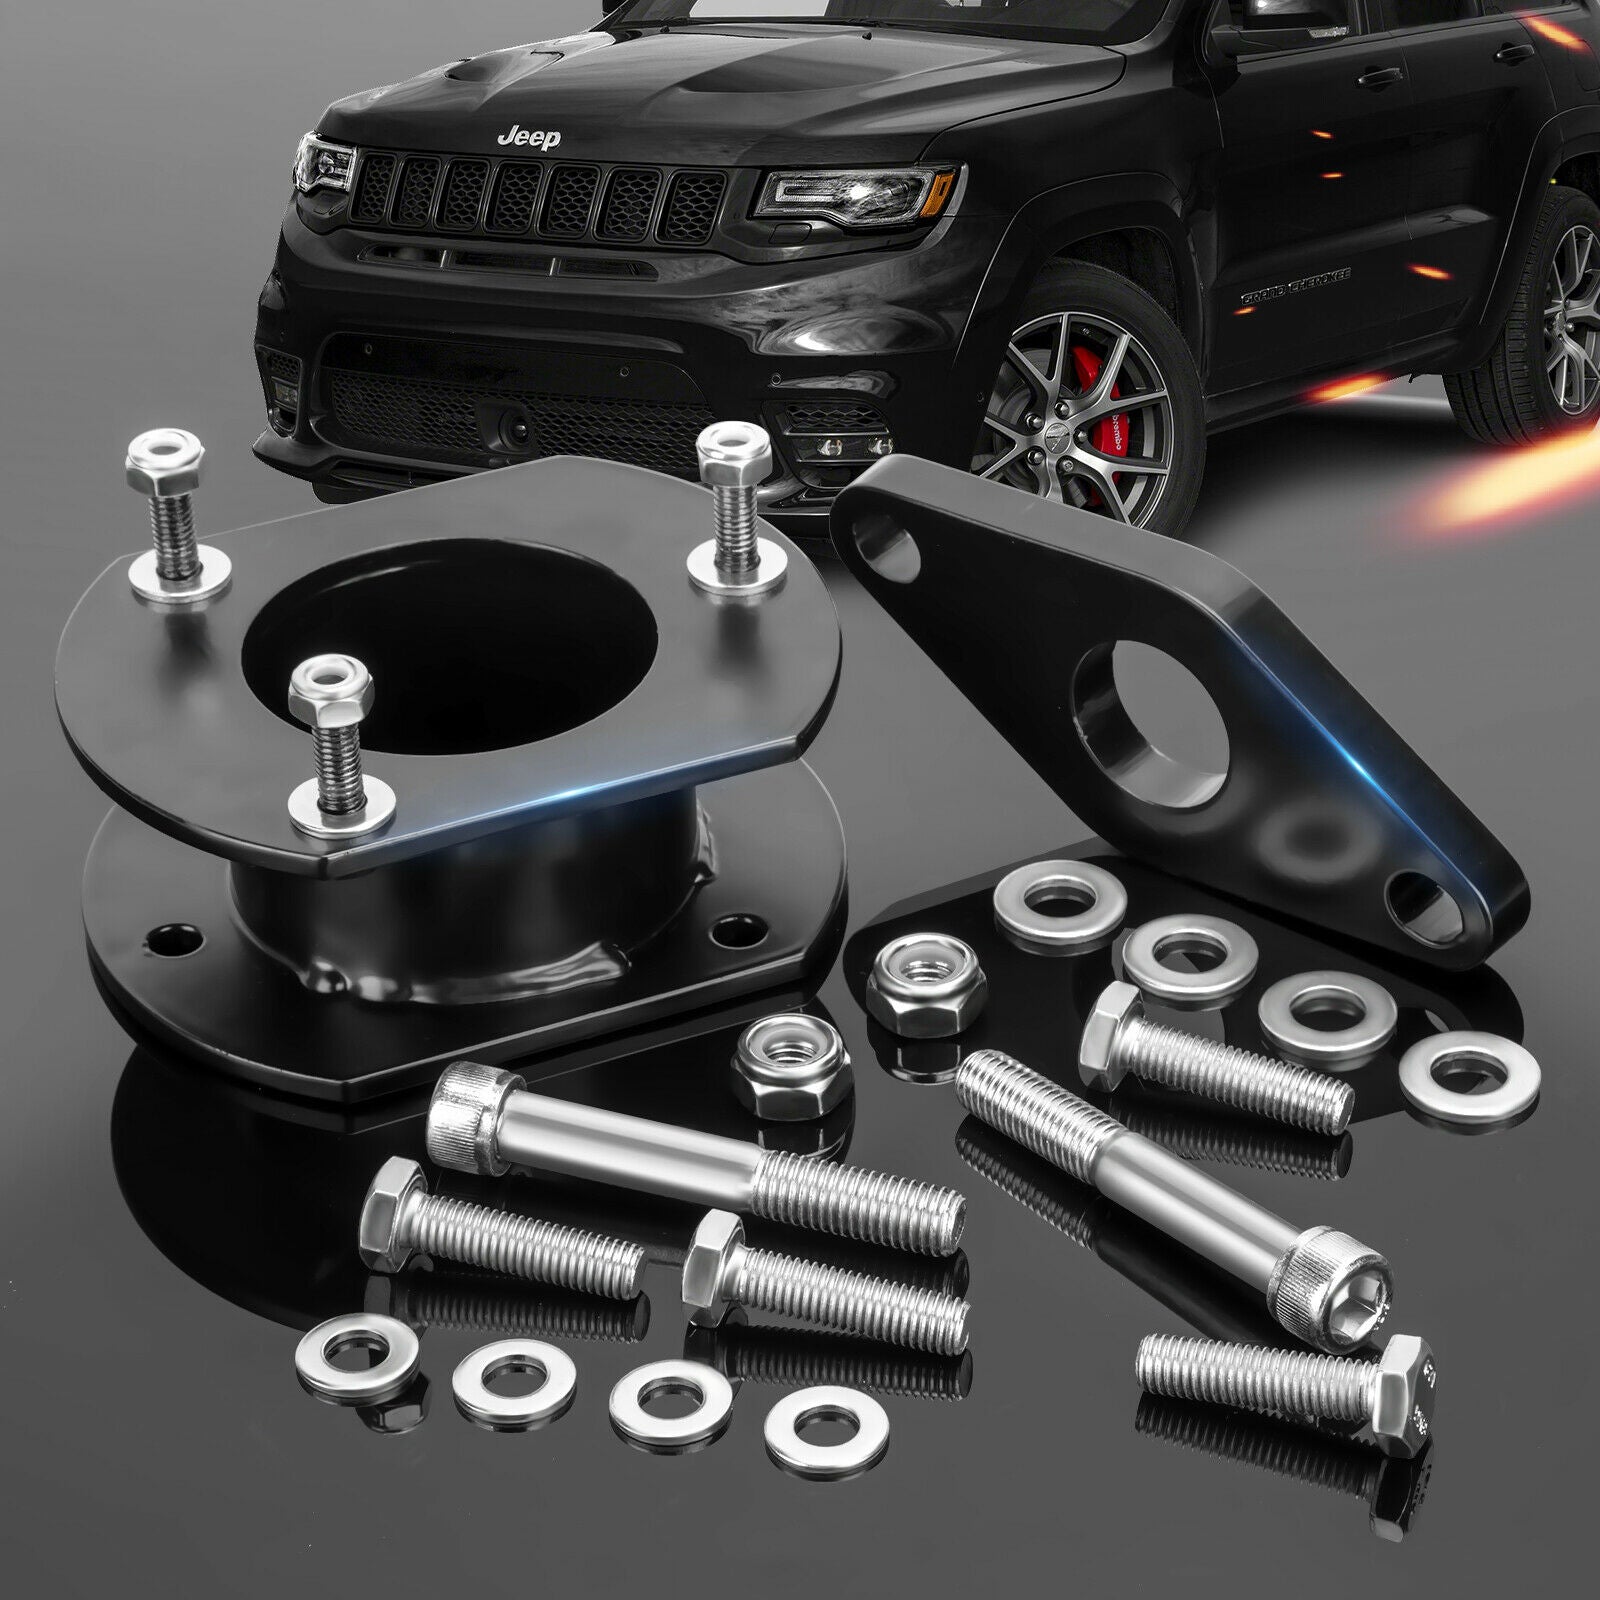 2.5" Front and 0.5" Rear Leveling Lift Kit fits 11-21 Jeep Grand Cherokee WK 2WD 4WD 4X4 - KSP performance 